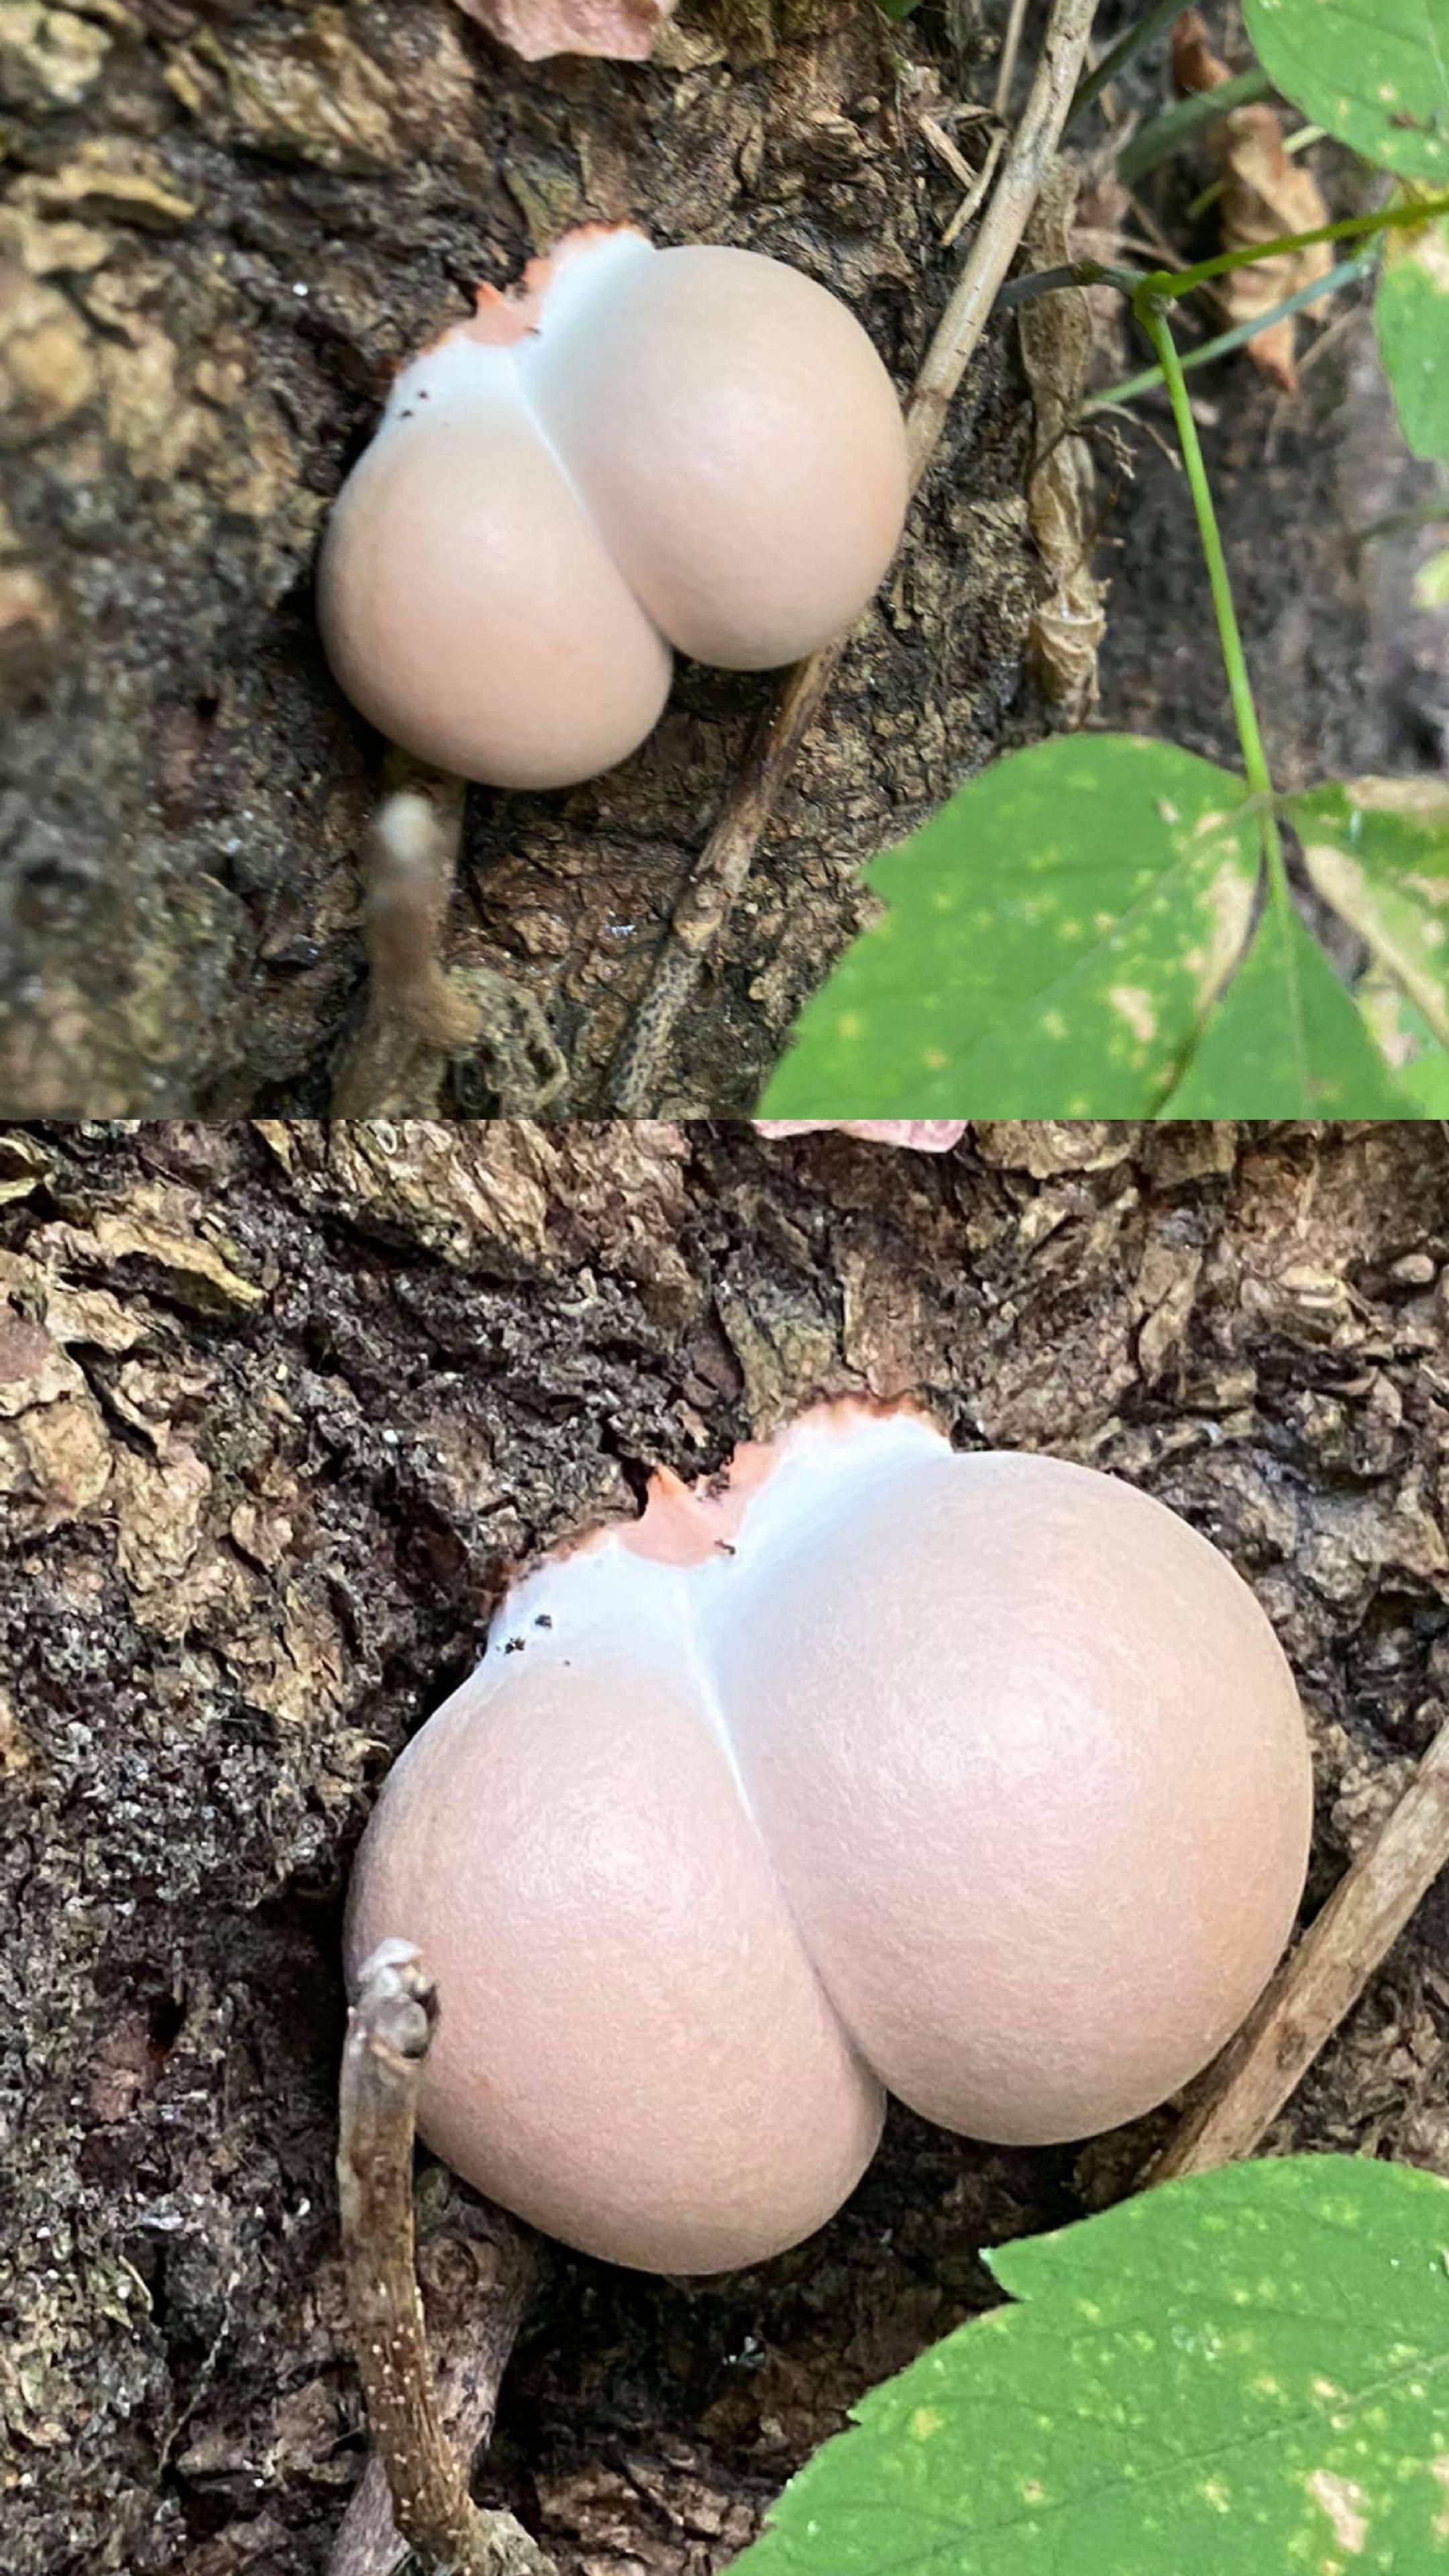 This mushroom has the biggest booty I ever did see